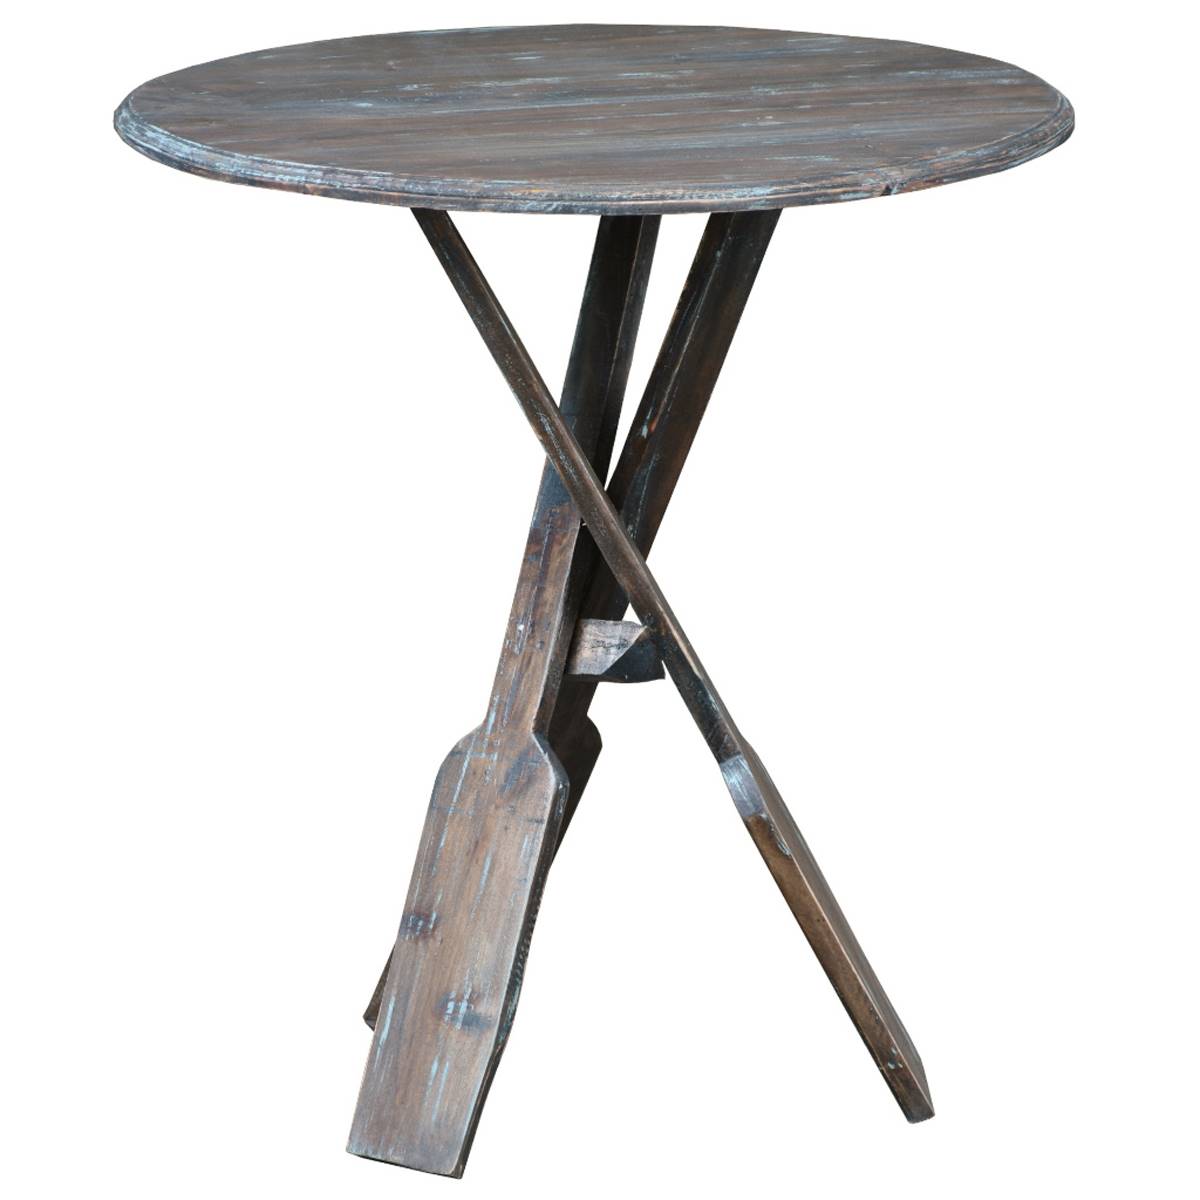 Besthom Chic Cottage Brown Bluebrush Brown Wood End Table